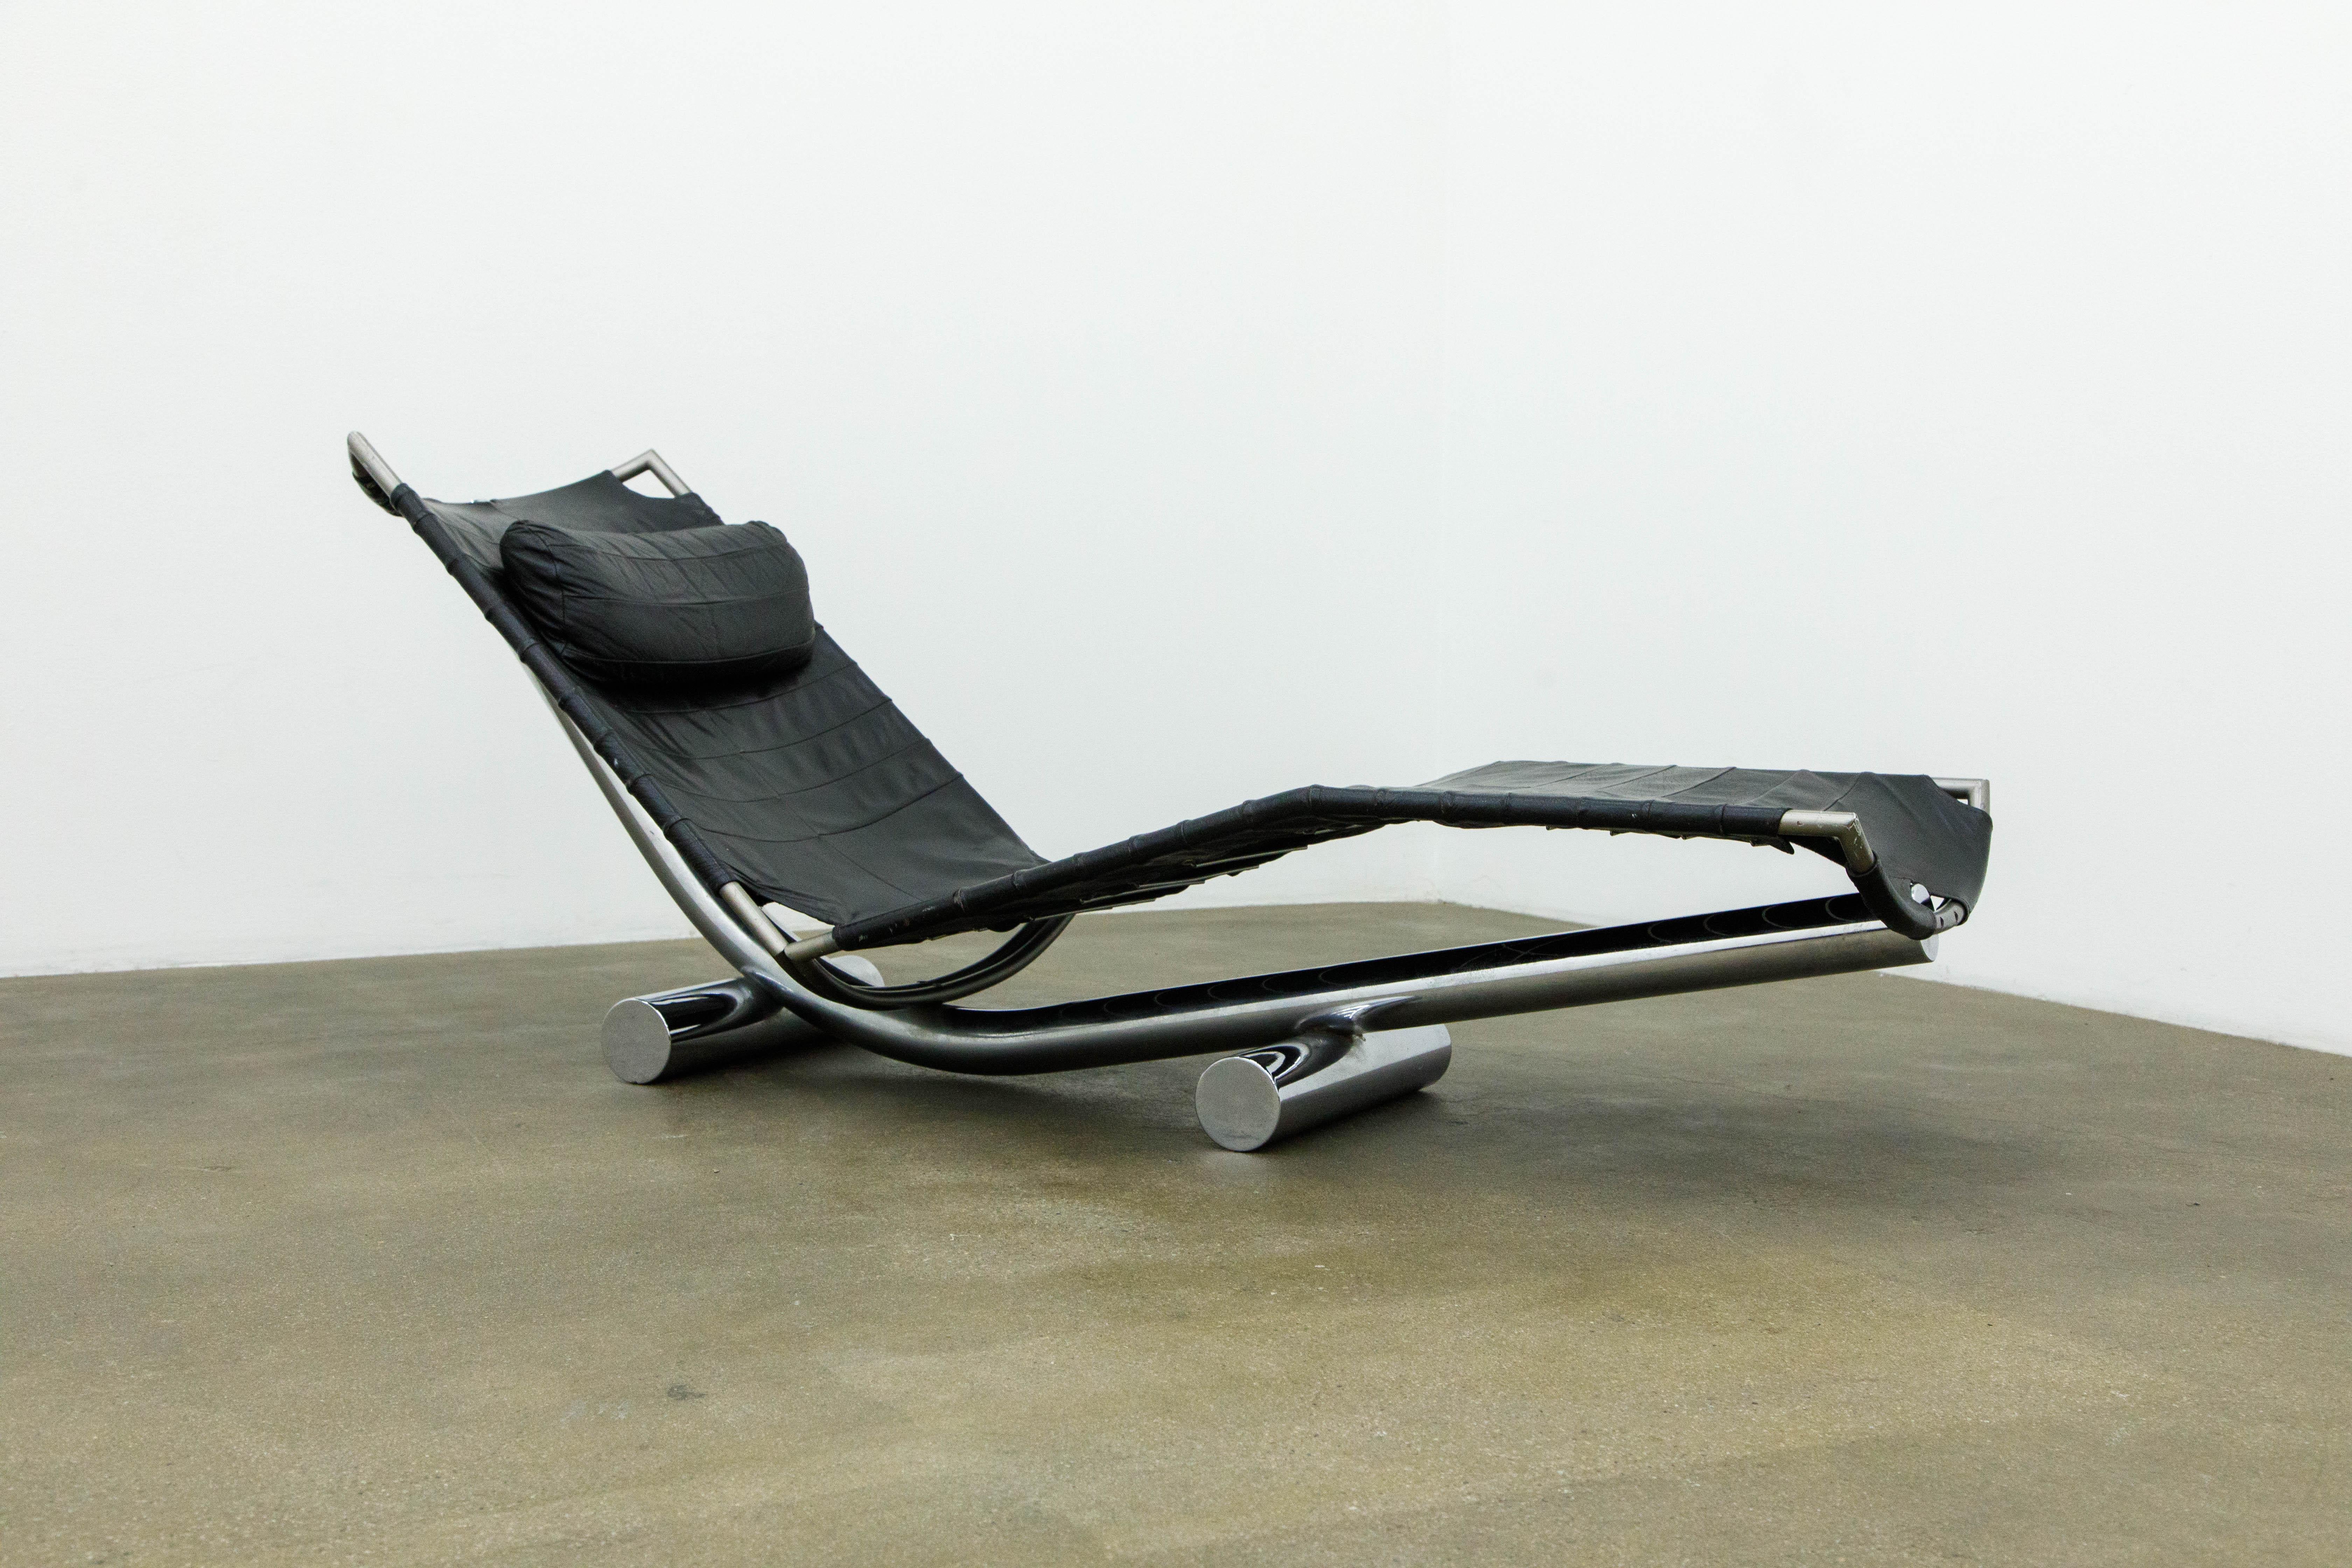 A unique 'Chariot' chaise lounge by Paul Tuttle for Strassle International, circa 1972 Switzerland. Constructed from chrome plated tubular steel frame and leather sling, this suspended design chaise is comfortable, collectible, and looks incredible.